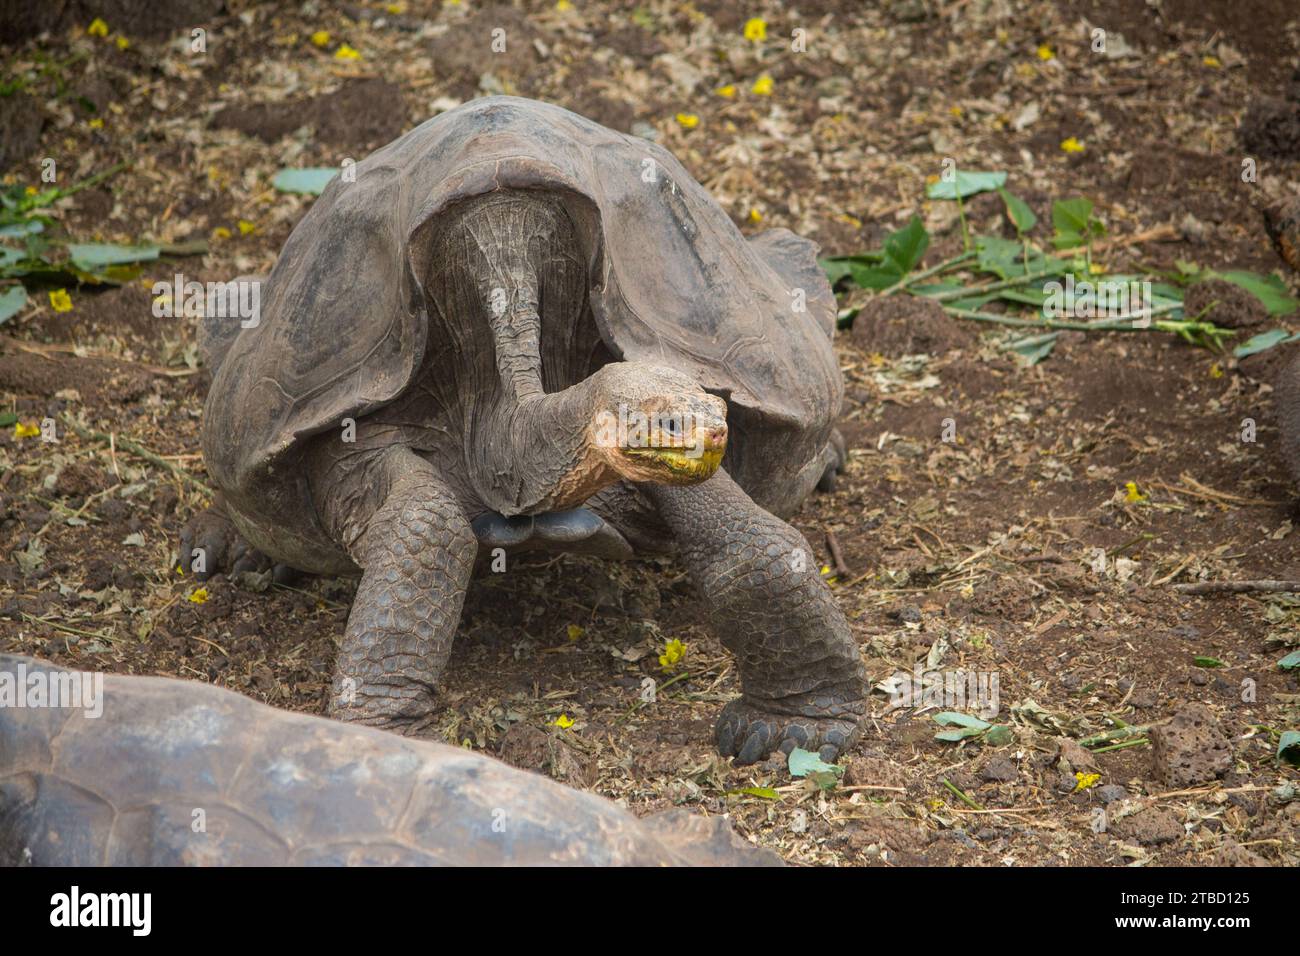 A Hood Island giant tortoise at Charles Darwin Research Station Stock Photo